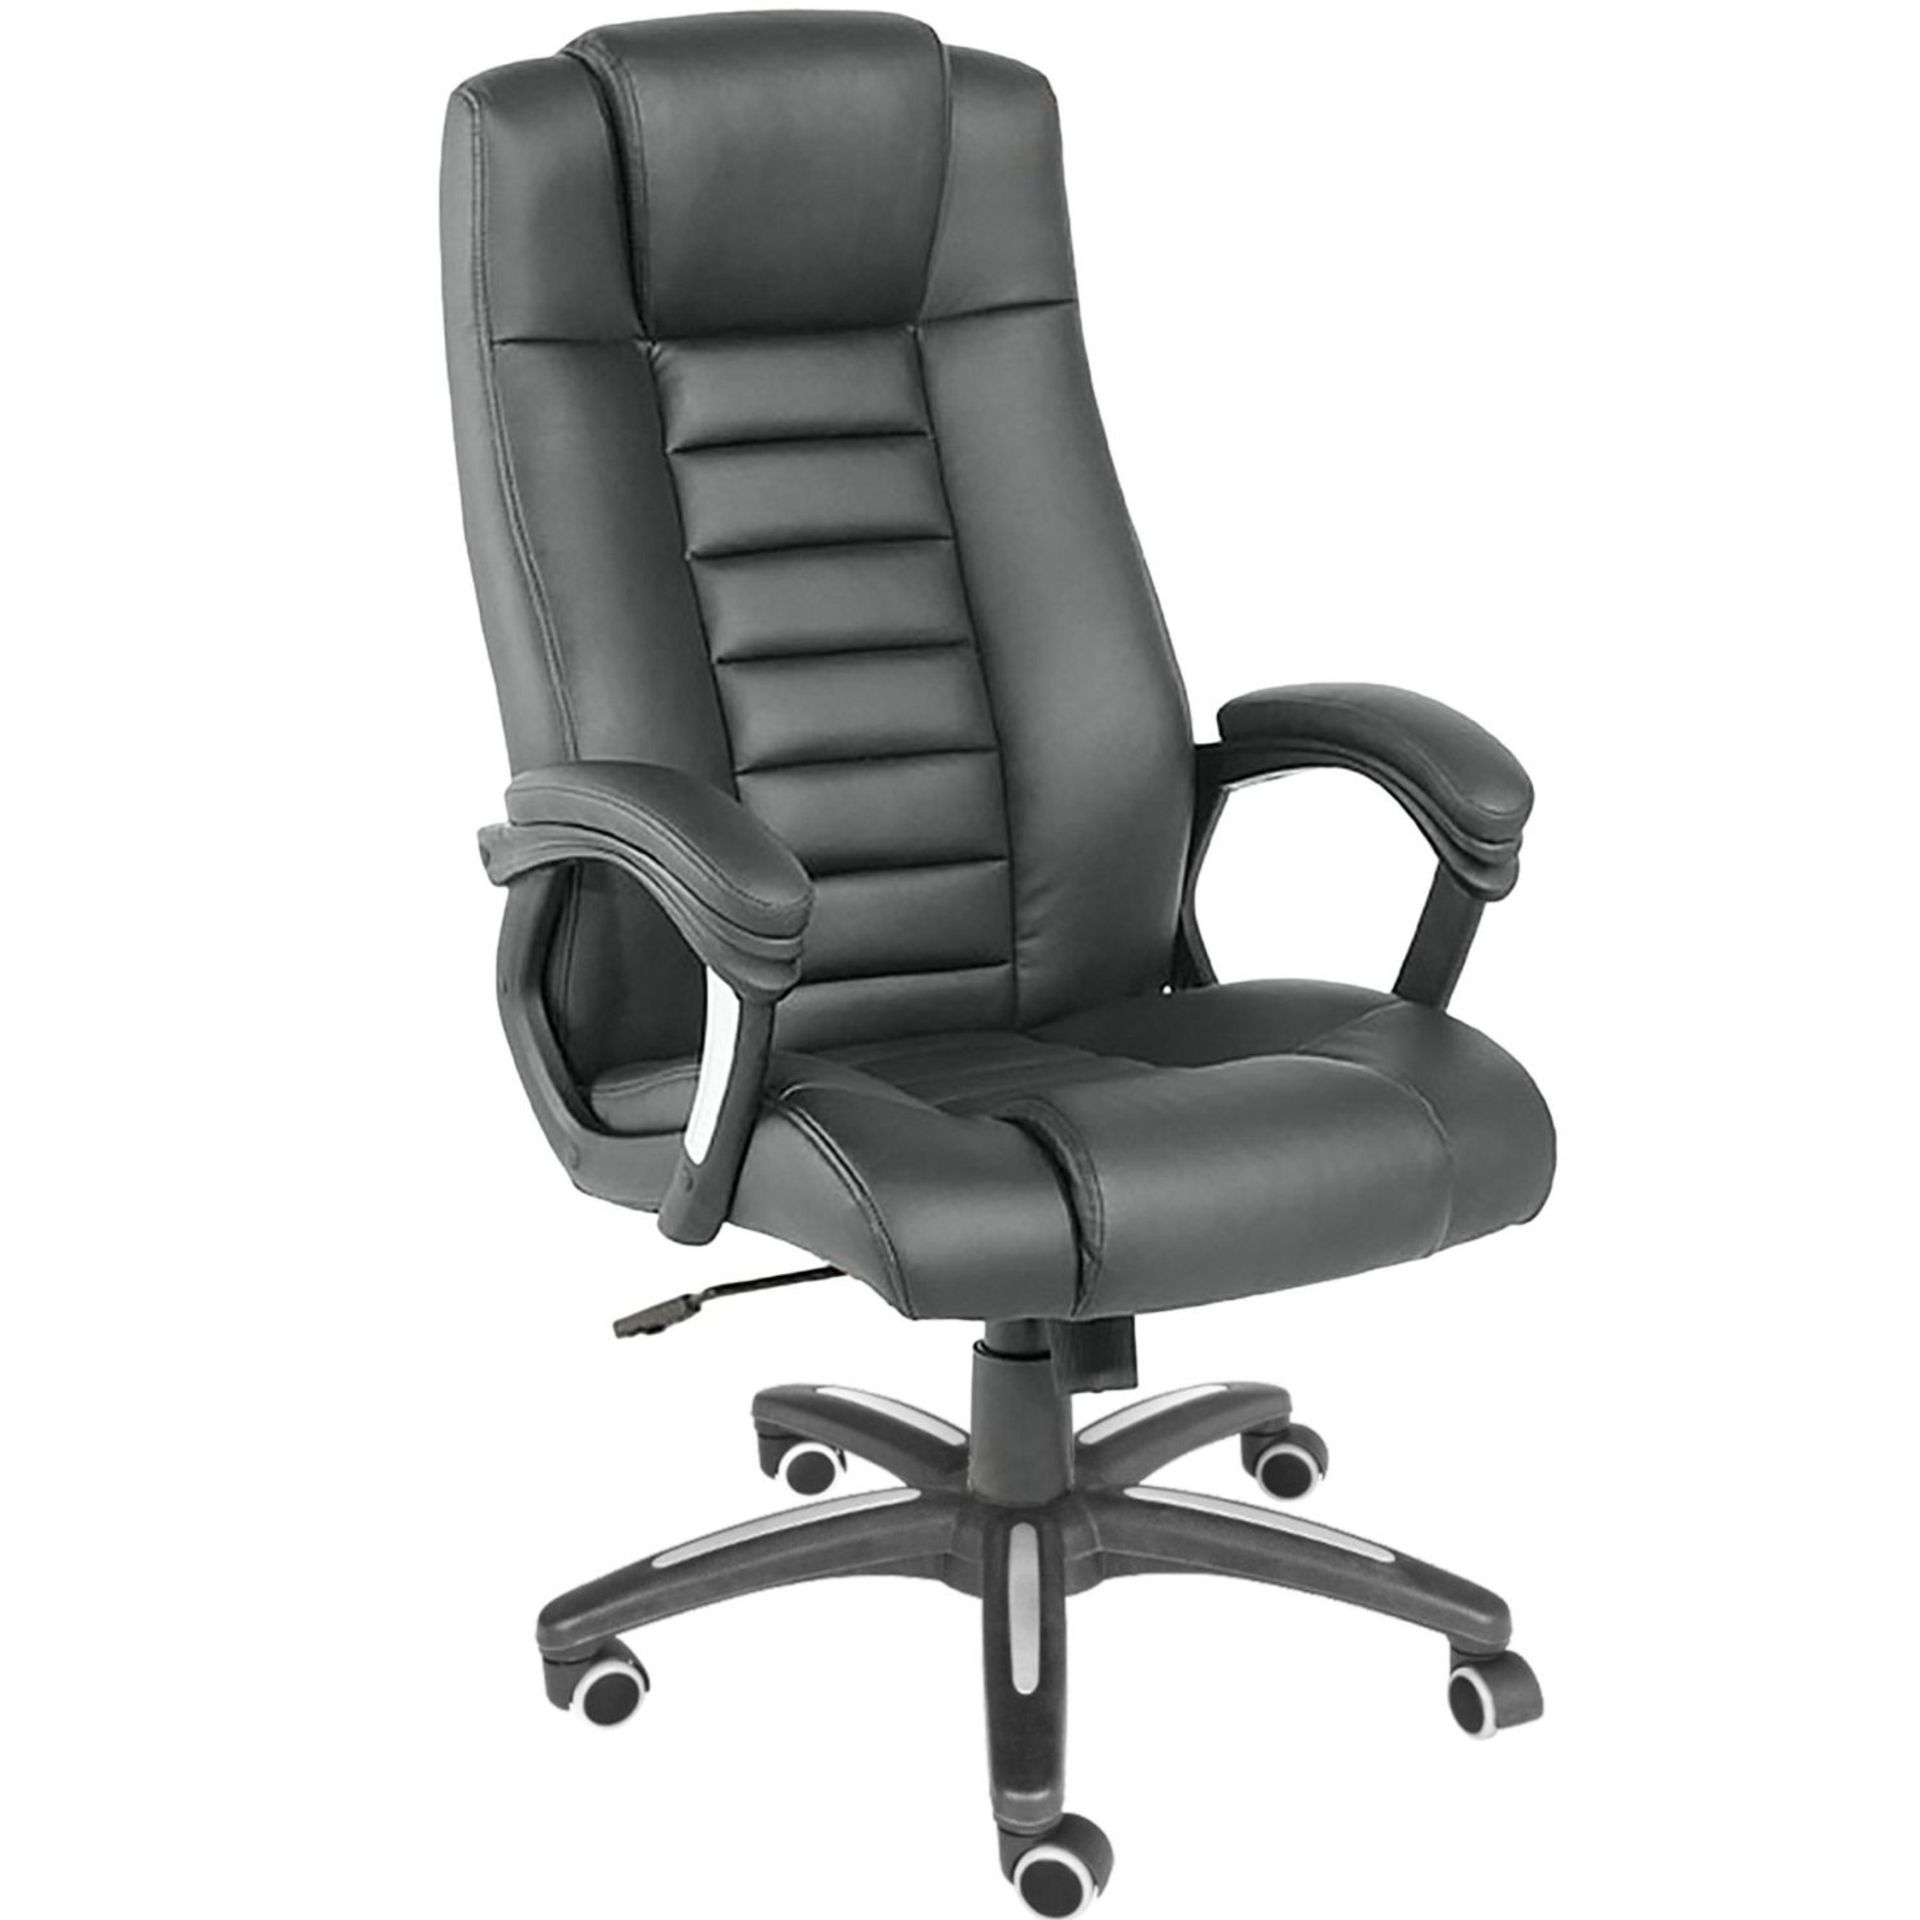 Tectake - Luxury Office Chair Made Of Artificial Leather Black - Boxed. RRP £109.99 - Image 2 of 2